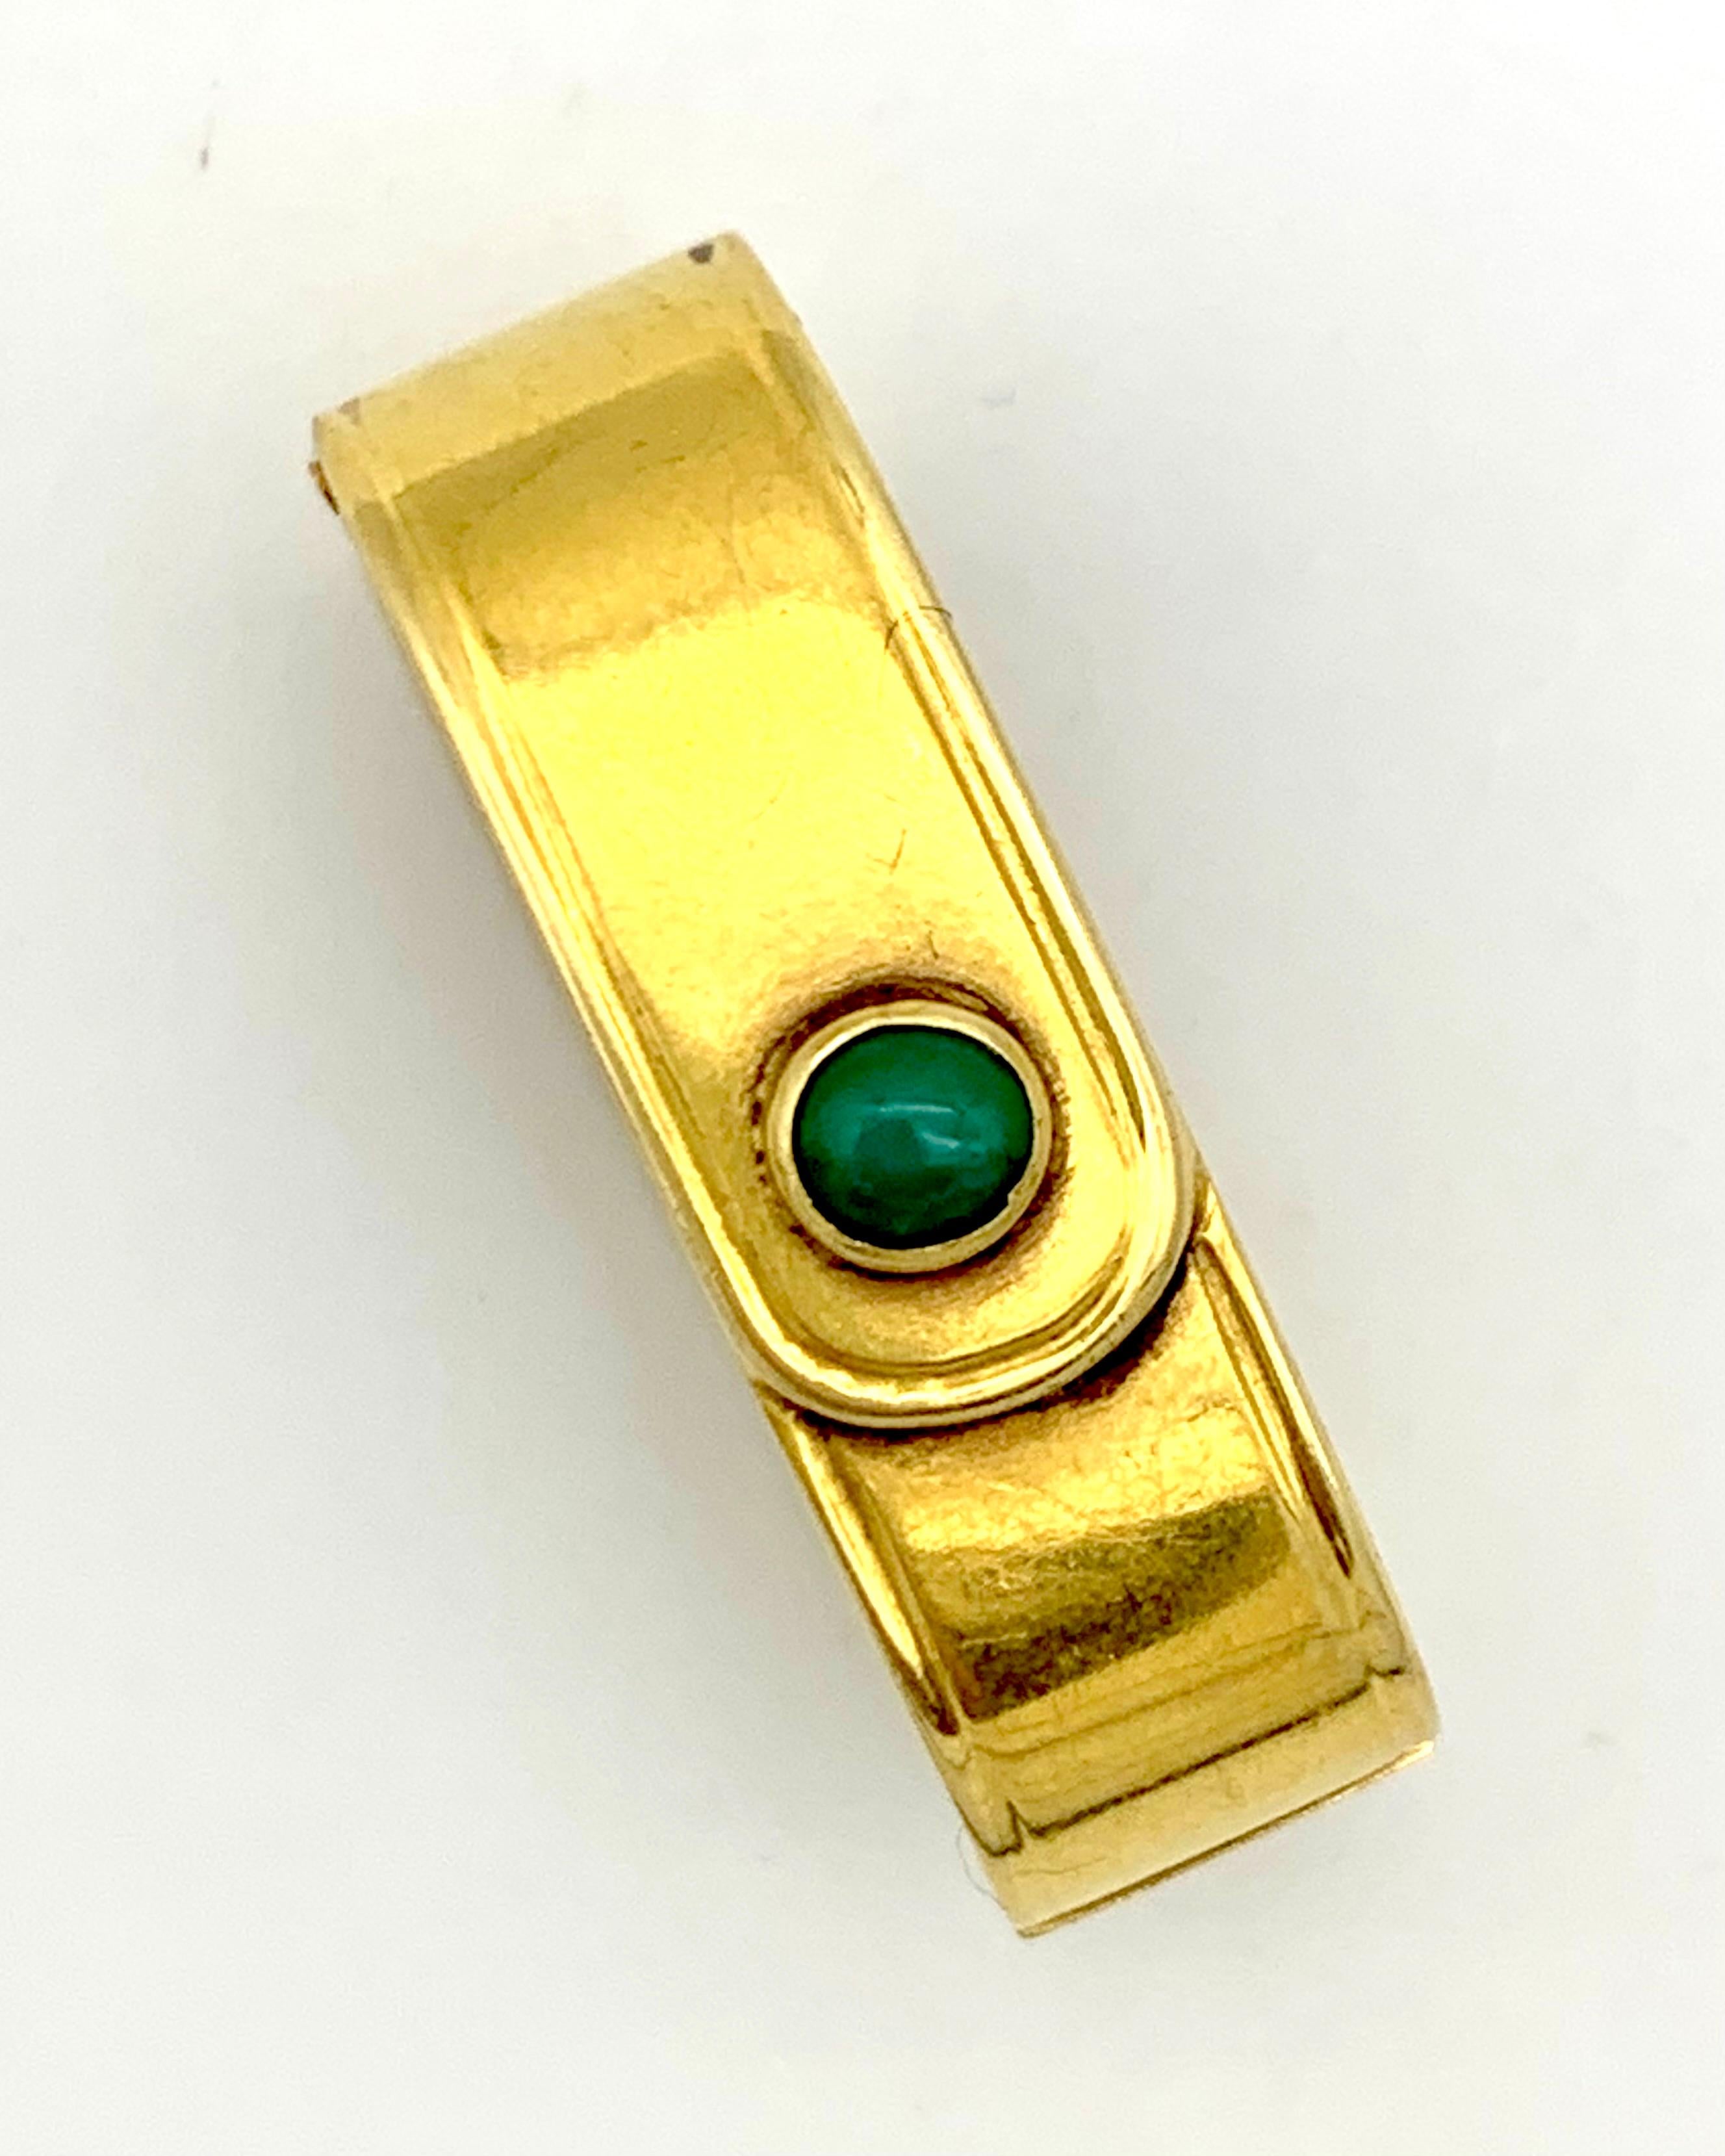  This elegant scarf clip is a fine example of modernistic tendencies in Victorian jewellery design which started to devellop from 1875 ca. This little jewel was created in 1880 ca out of 15 karat gold.  Designed as a tiny belt it has a turquoise